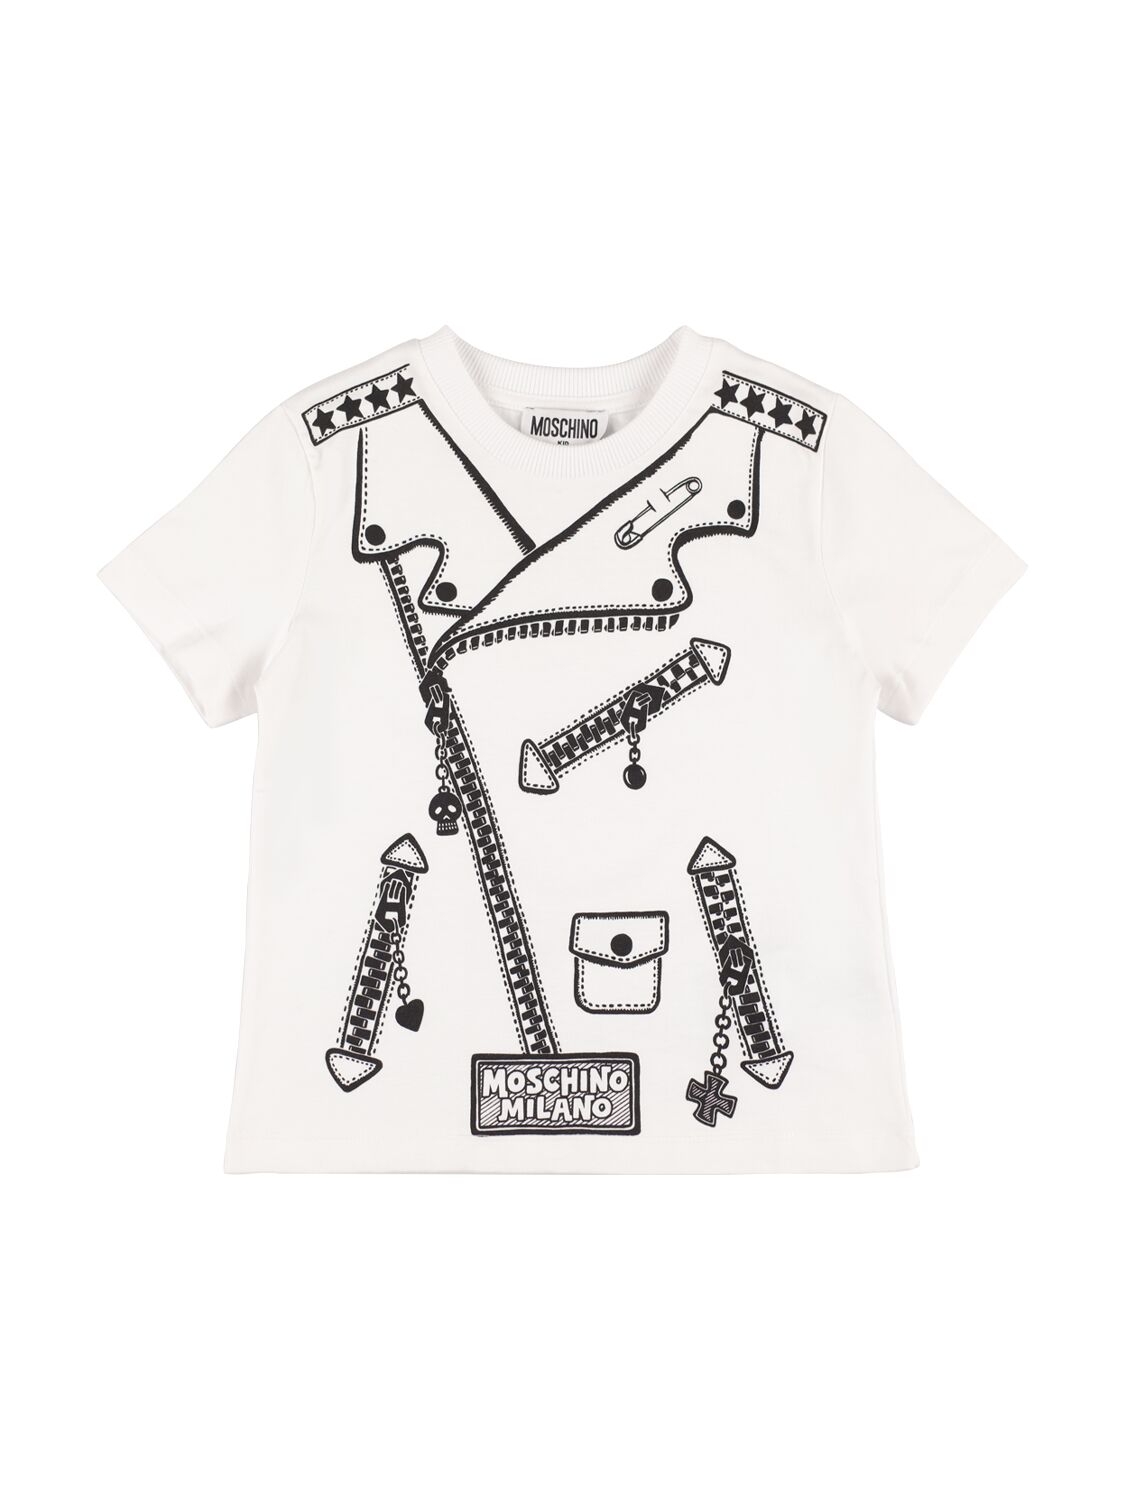 Moschino Kids' Printed Cotton Jersey T-shirt In White